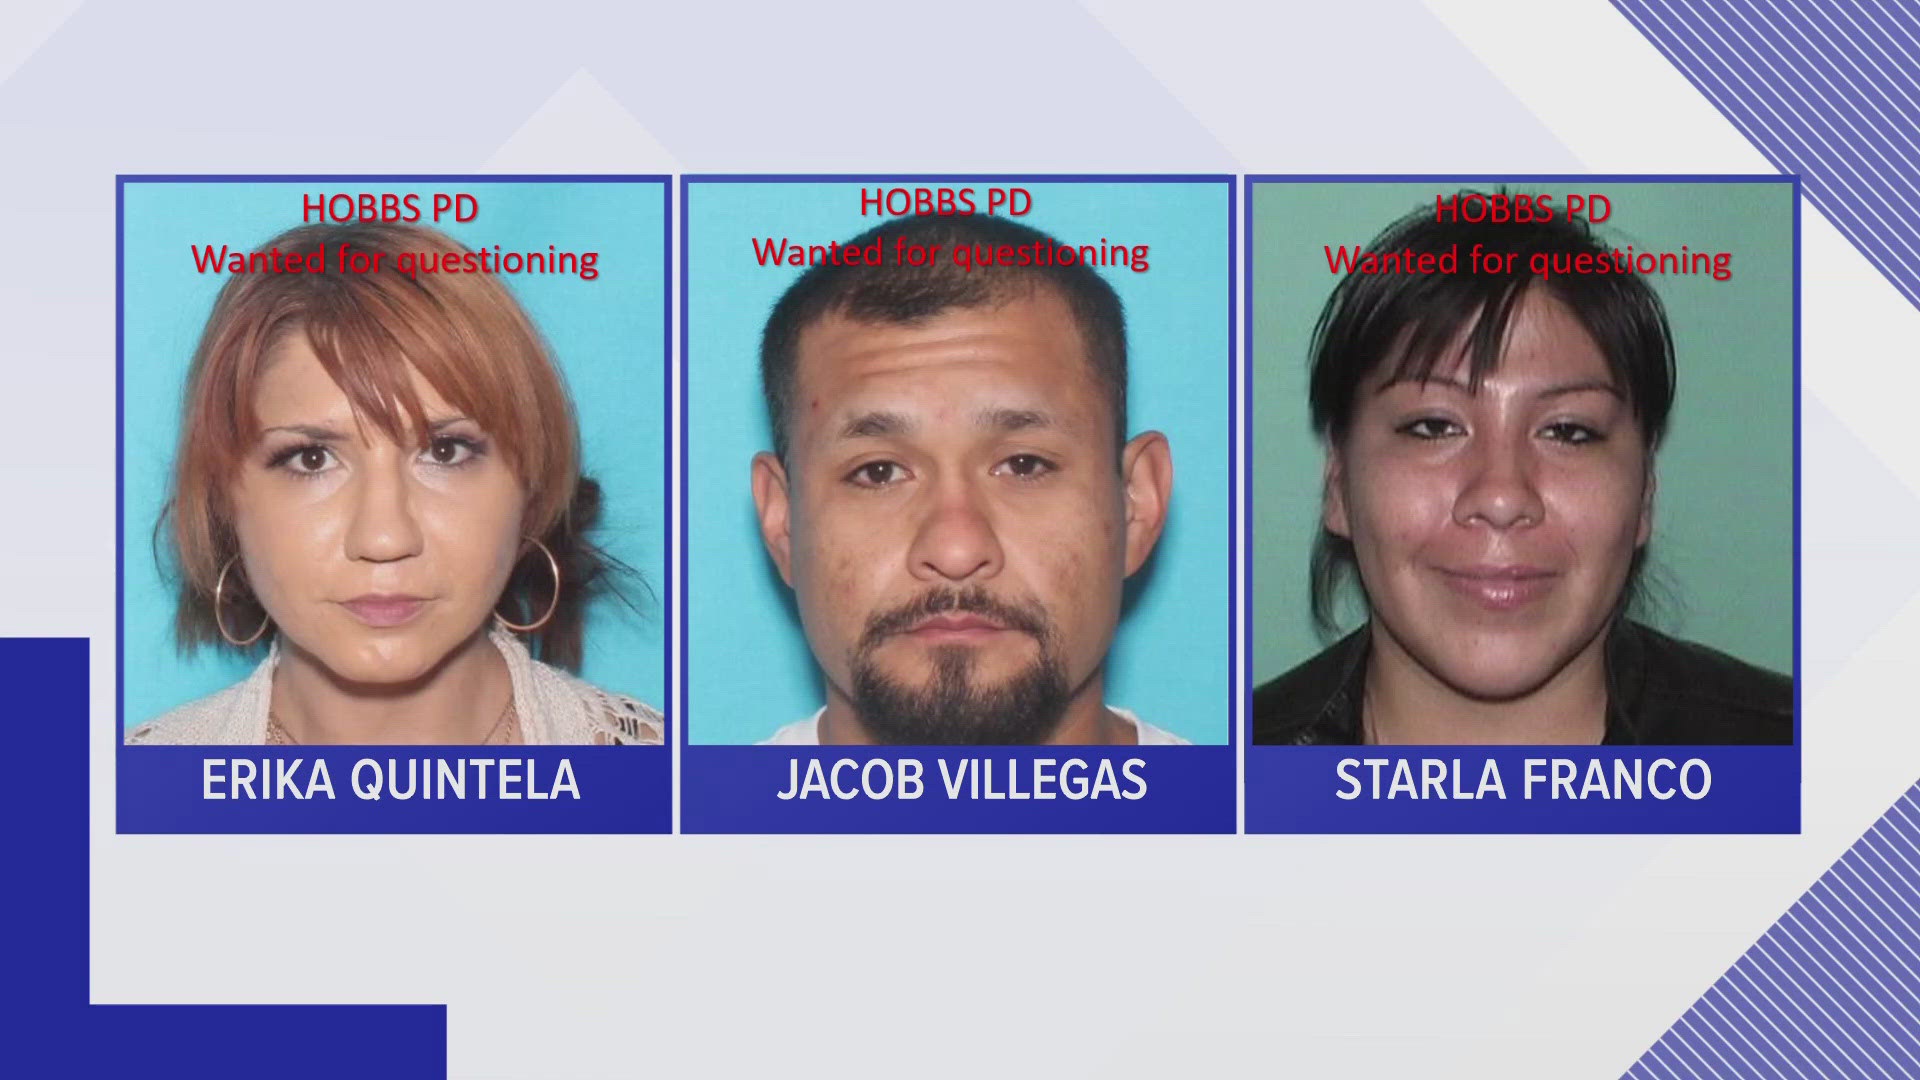 Hobbs PD is seeking the public's help in discovering the whereabouts of Jacob Villegas, Erika Quintela and Starla Franco.